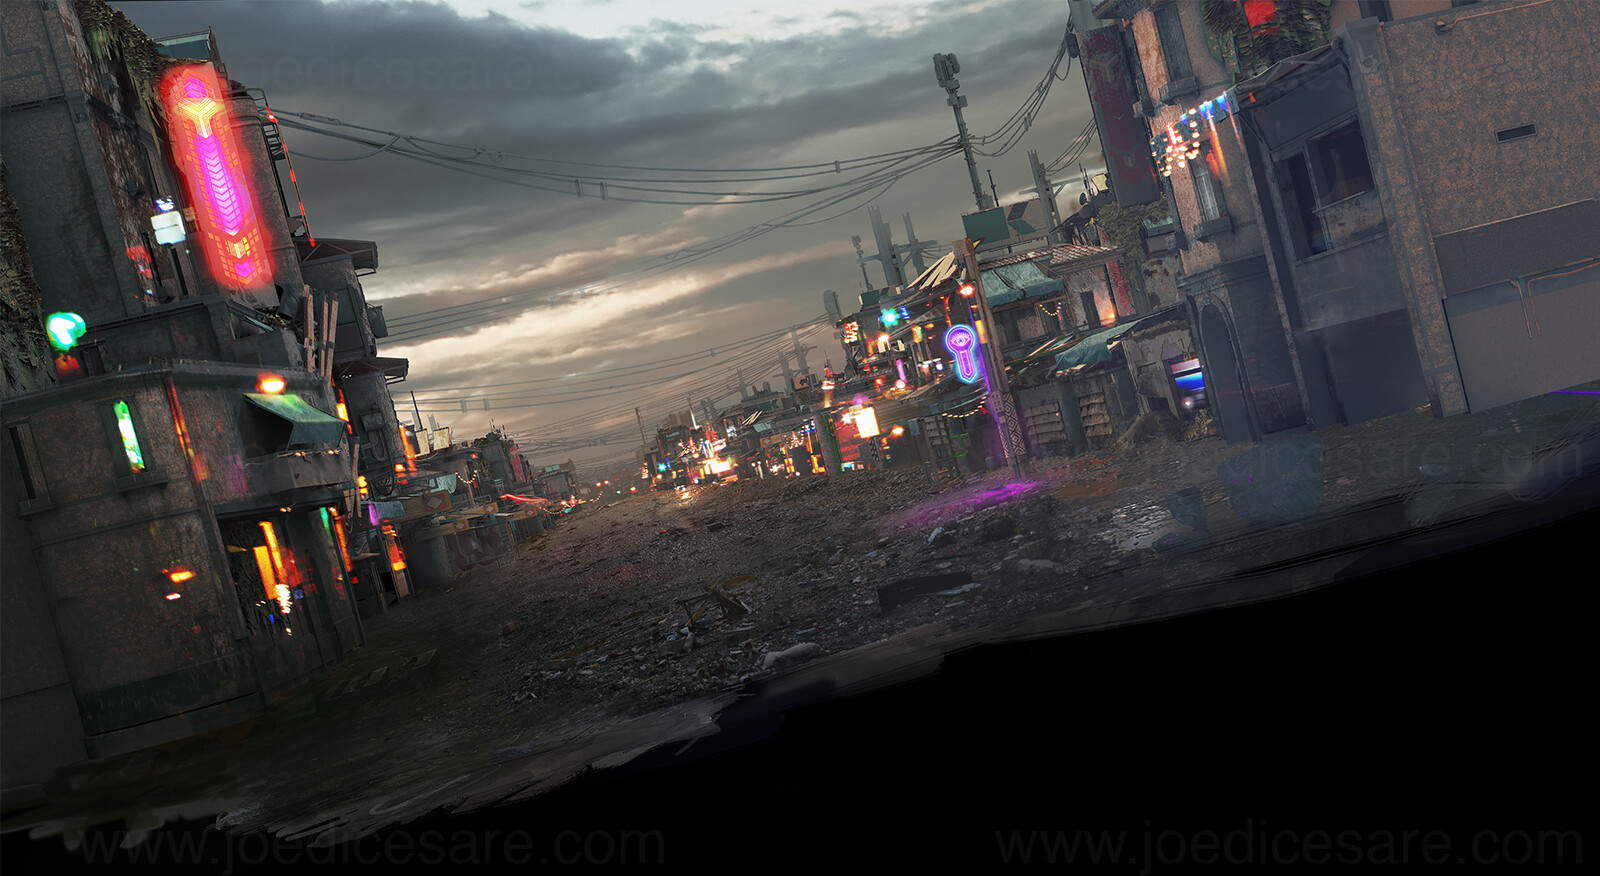 Final Matte Painting - I created several layers for the lights and neon signs so they could be animated in the final comp.